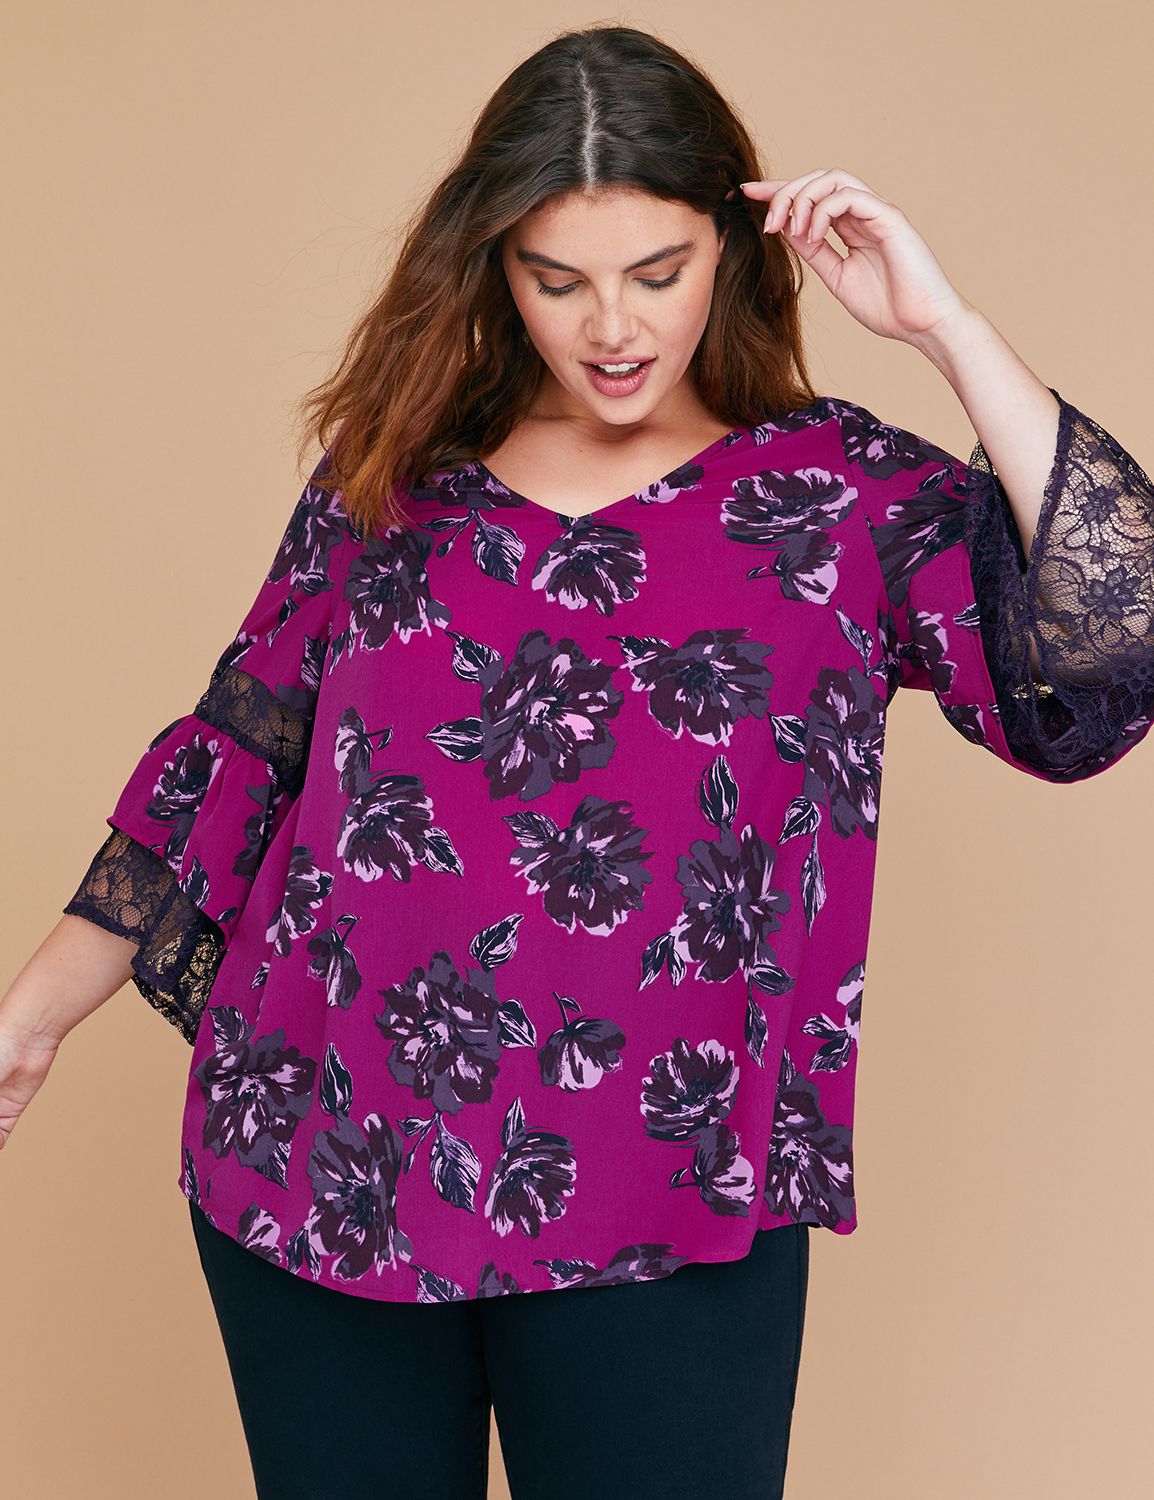 Dressy plus size blouses plus size for women – Plus Size Long Sleeve Shirts & Blouses for Women | – Discover the Latest Best Selling Shop women's high-quality